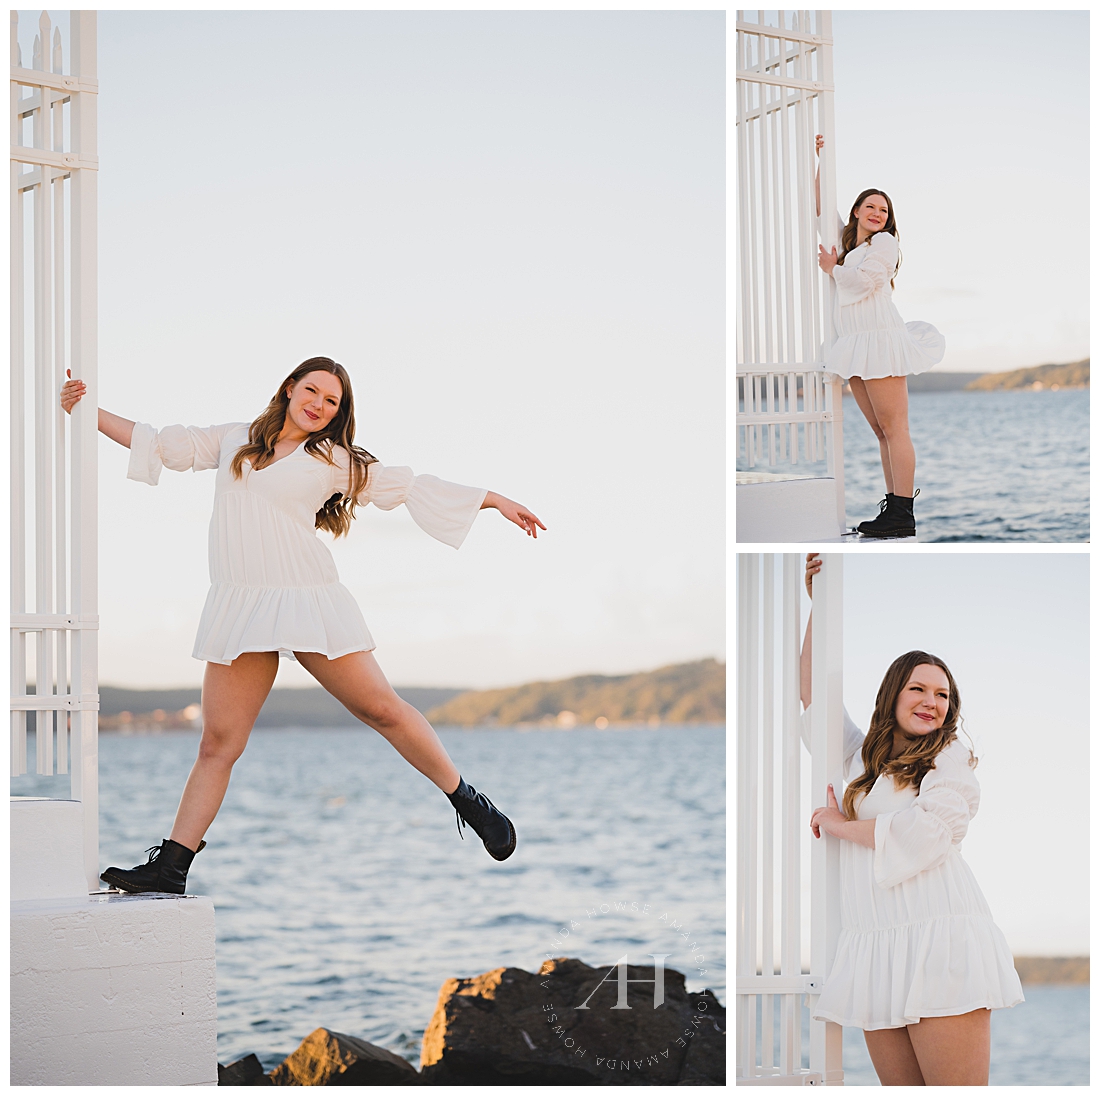 Adventurous Ideas For Senior Photos | Long-Sleeve White Dress and Doc Martens, Waterfront Poses | Photographed by the Best Tacoma Senior Photographer Amanda Howse Photography